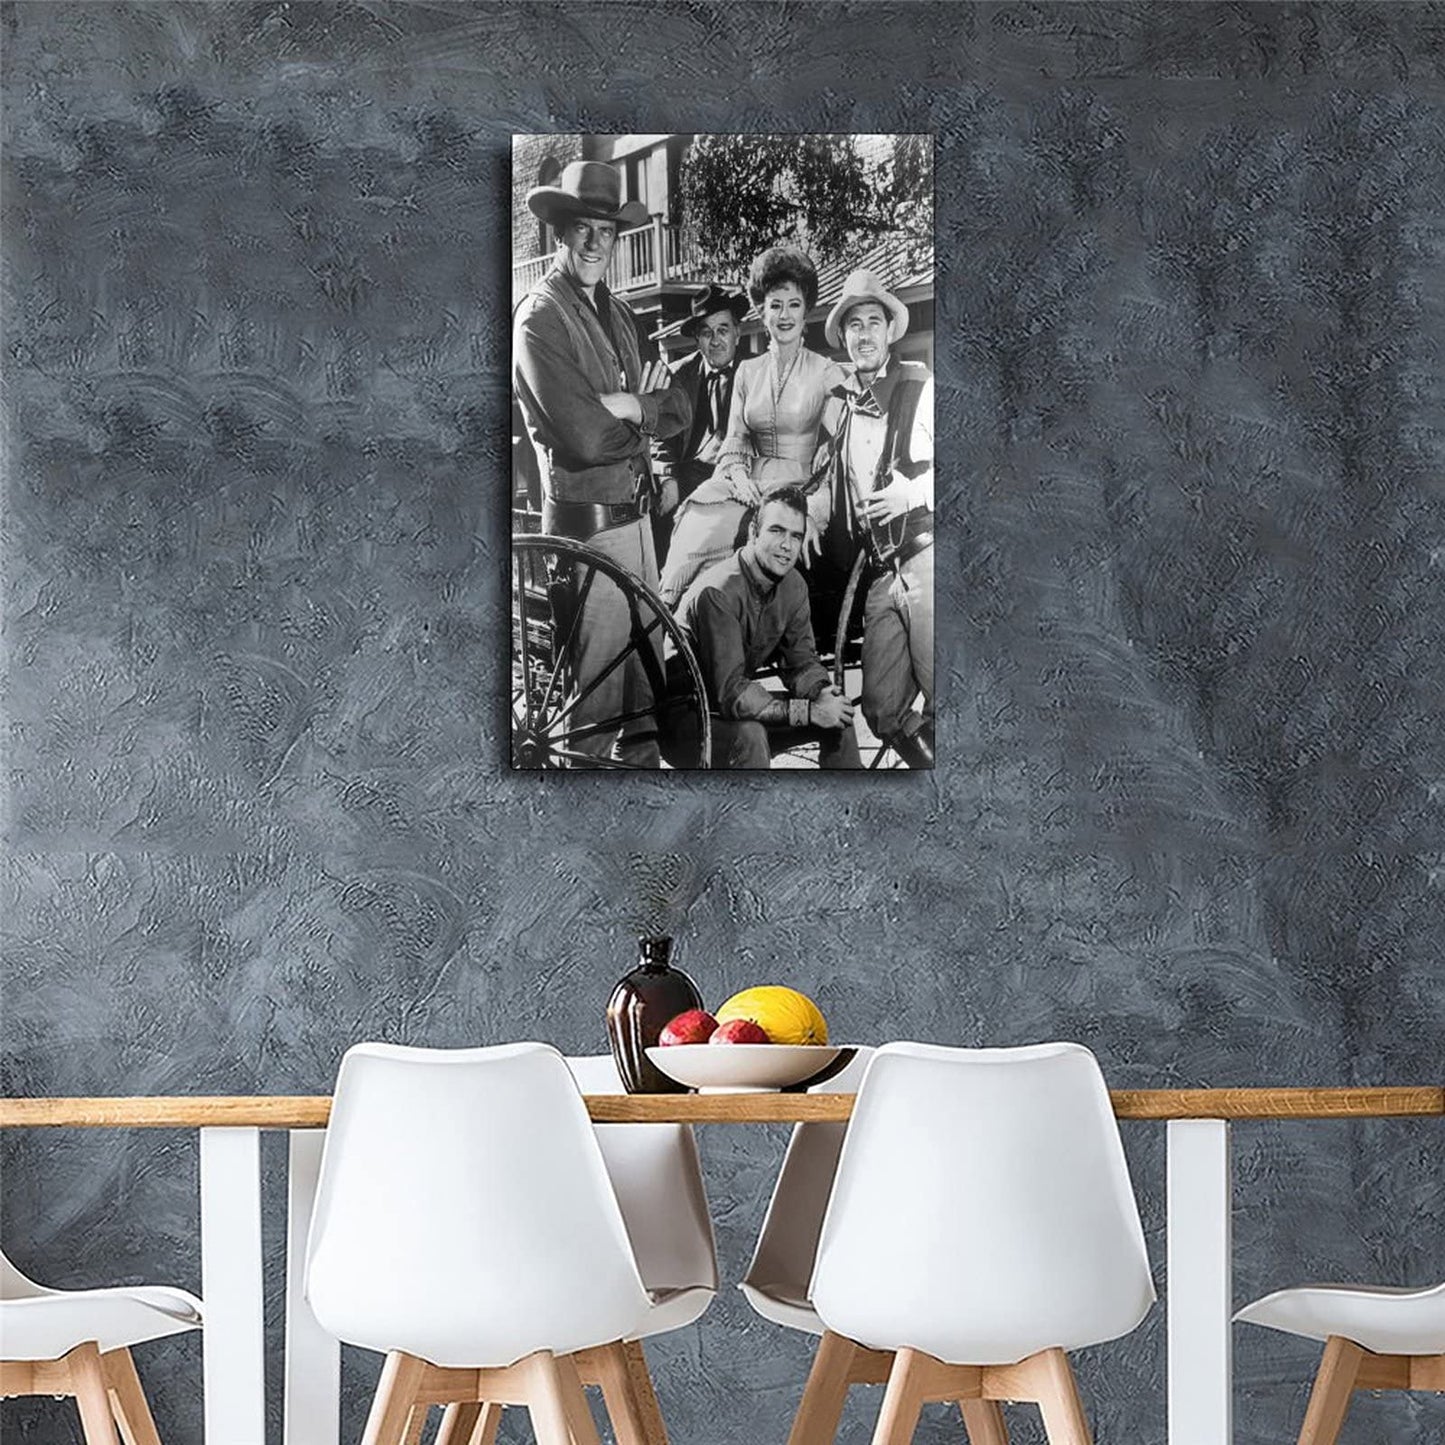 ZEEZFA Gunsmoke Cast Black and White Canvas Art Poster and Wall Art Picture Print Modern Family Bedroom Decor Posters 08x12inch(20x30cm)